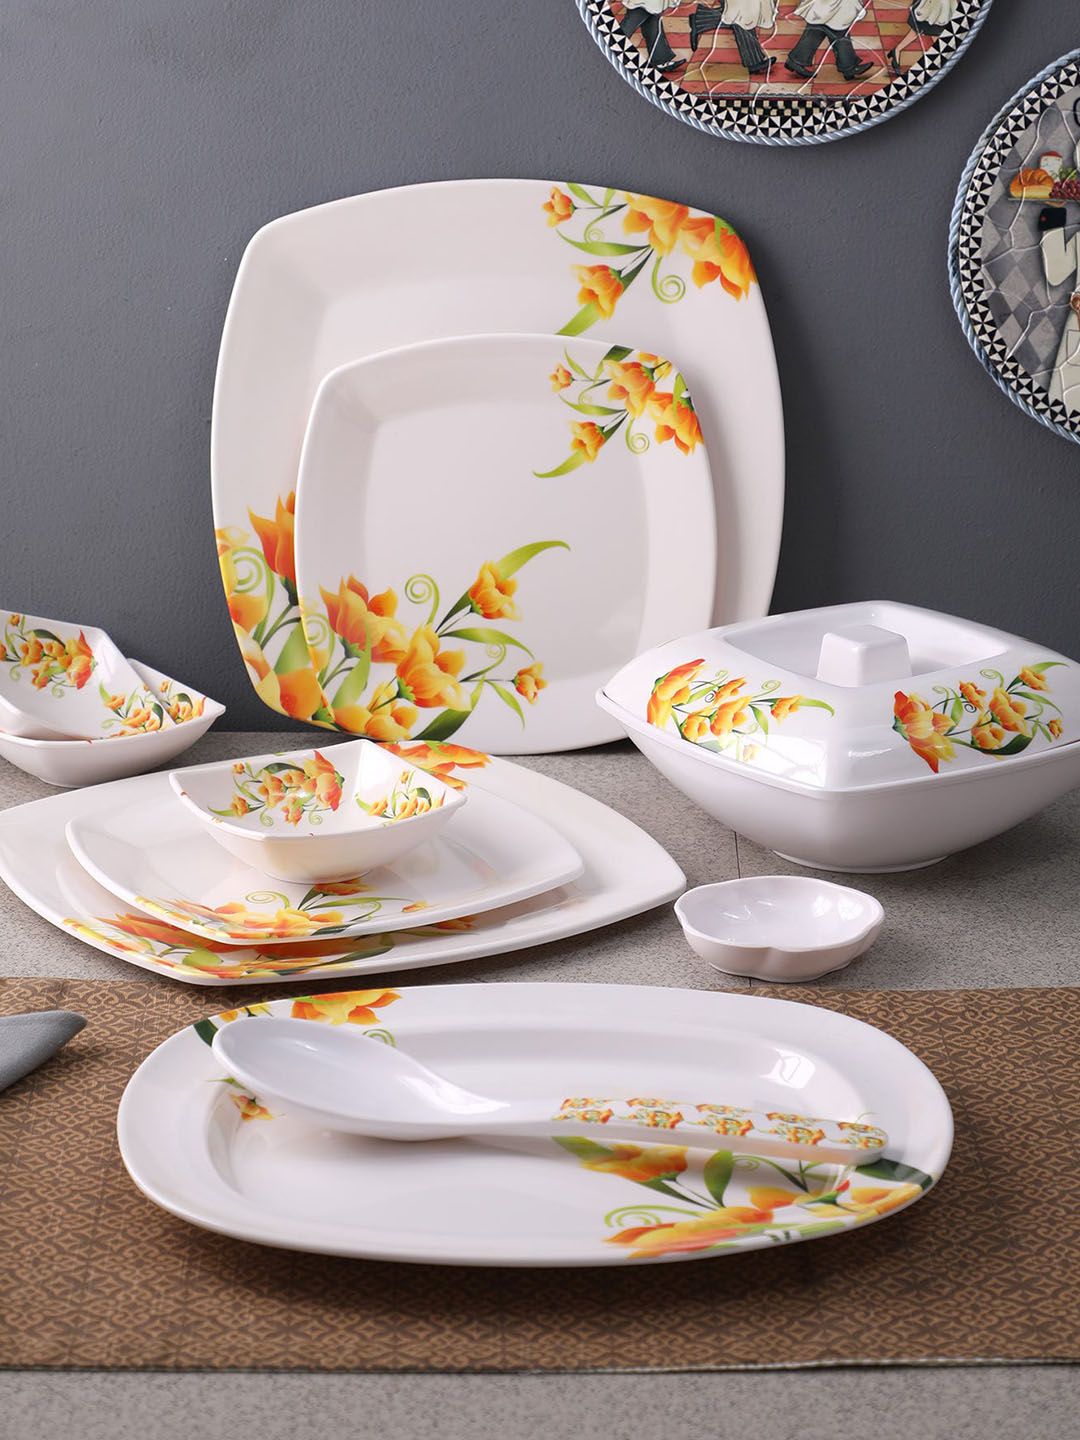 Gallery99 32 Pcs White Printed Dinner Set Price in India